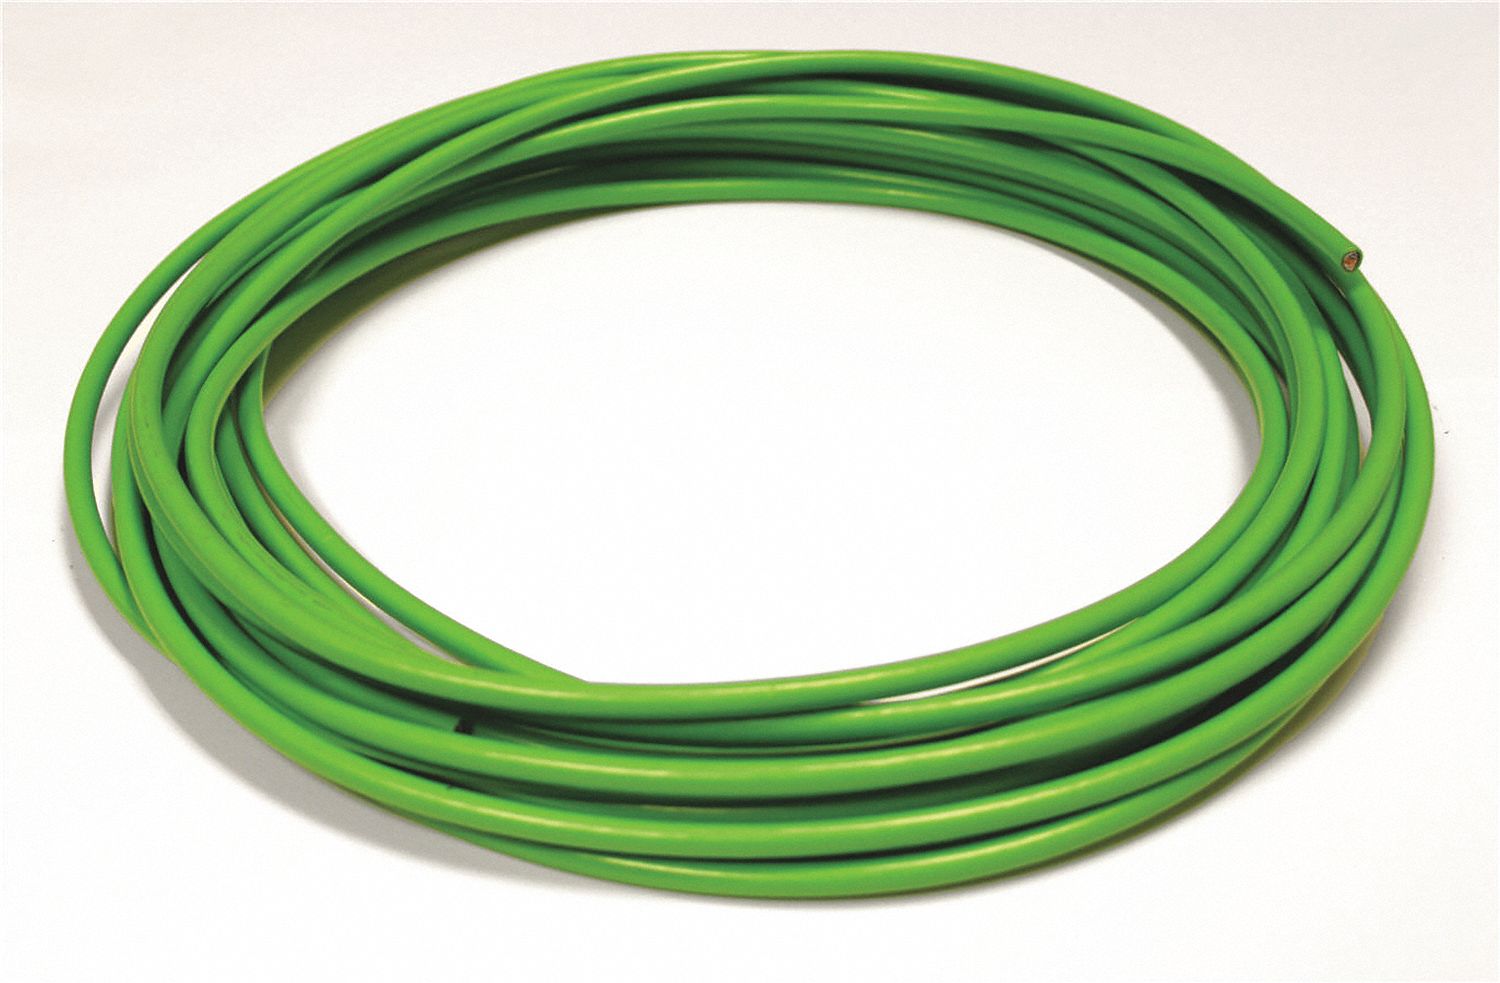 14G840 - Cable Cat 5e 22 AWG 65.5 ft Green